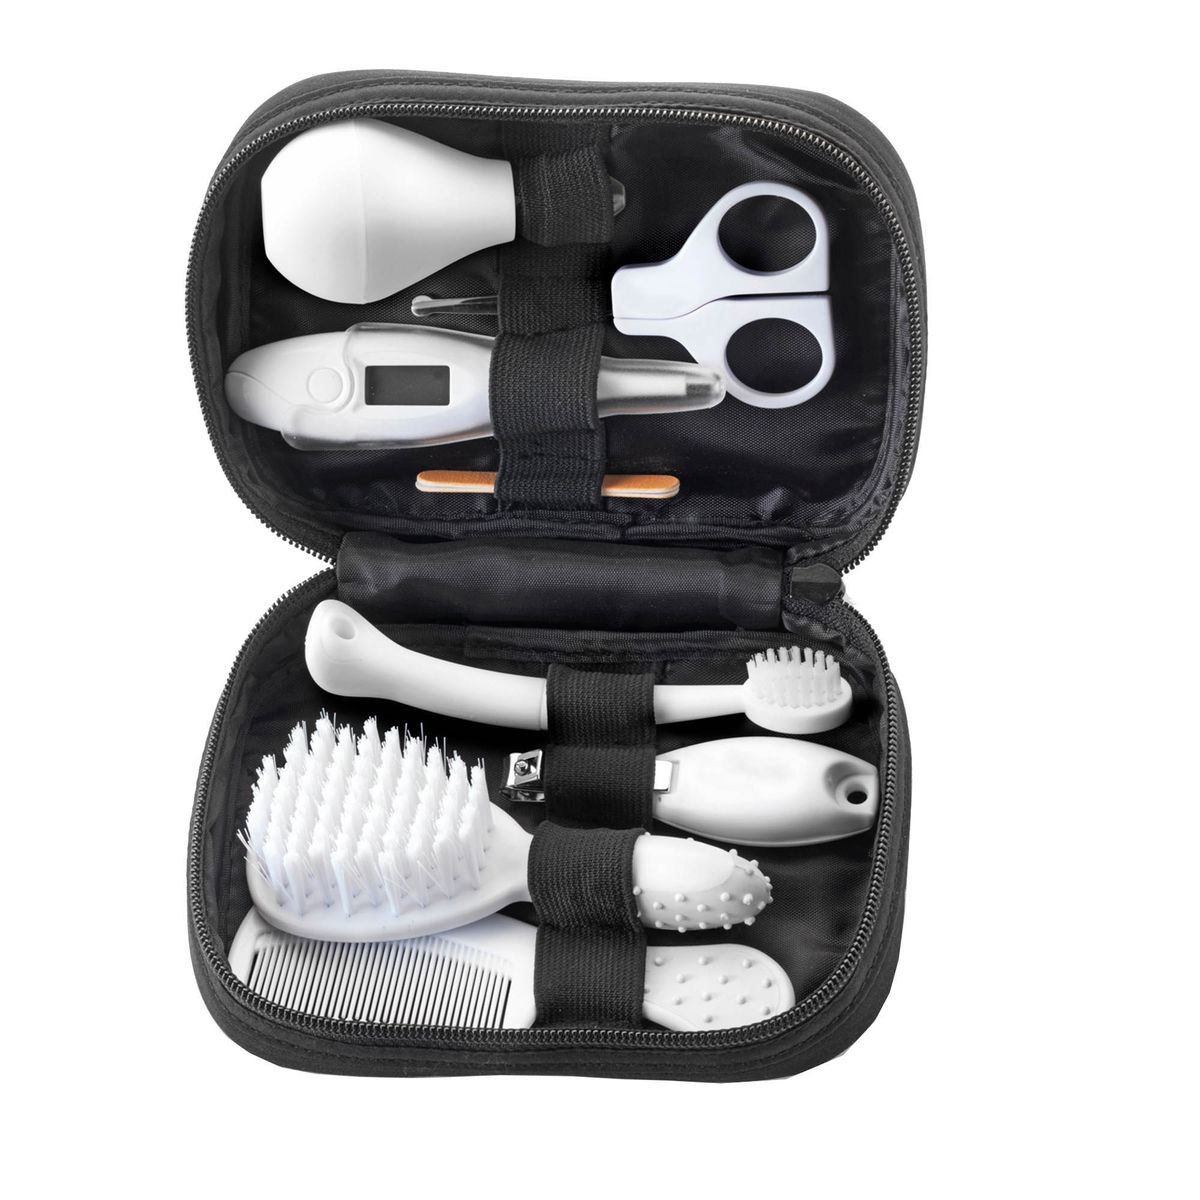 CTN Baby Healthcare and Grooming Kit